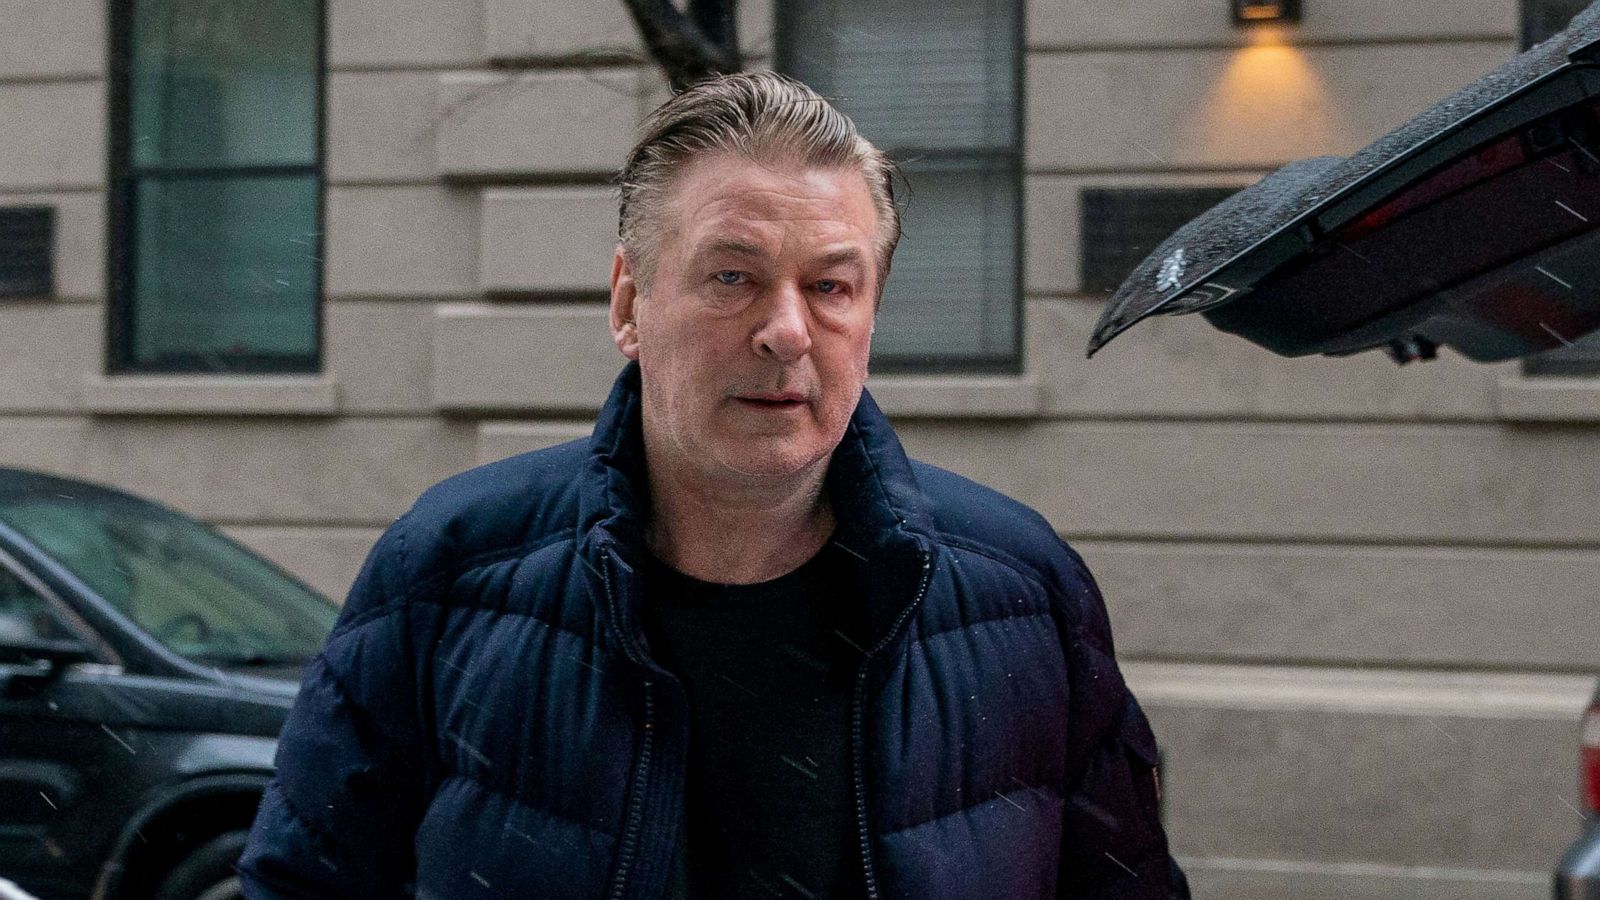 New Criminal Charges Loom for Alec Baldwin: Fresh Developments in the 'Rust' Shooting Case